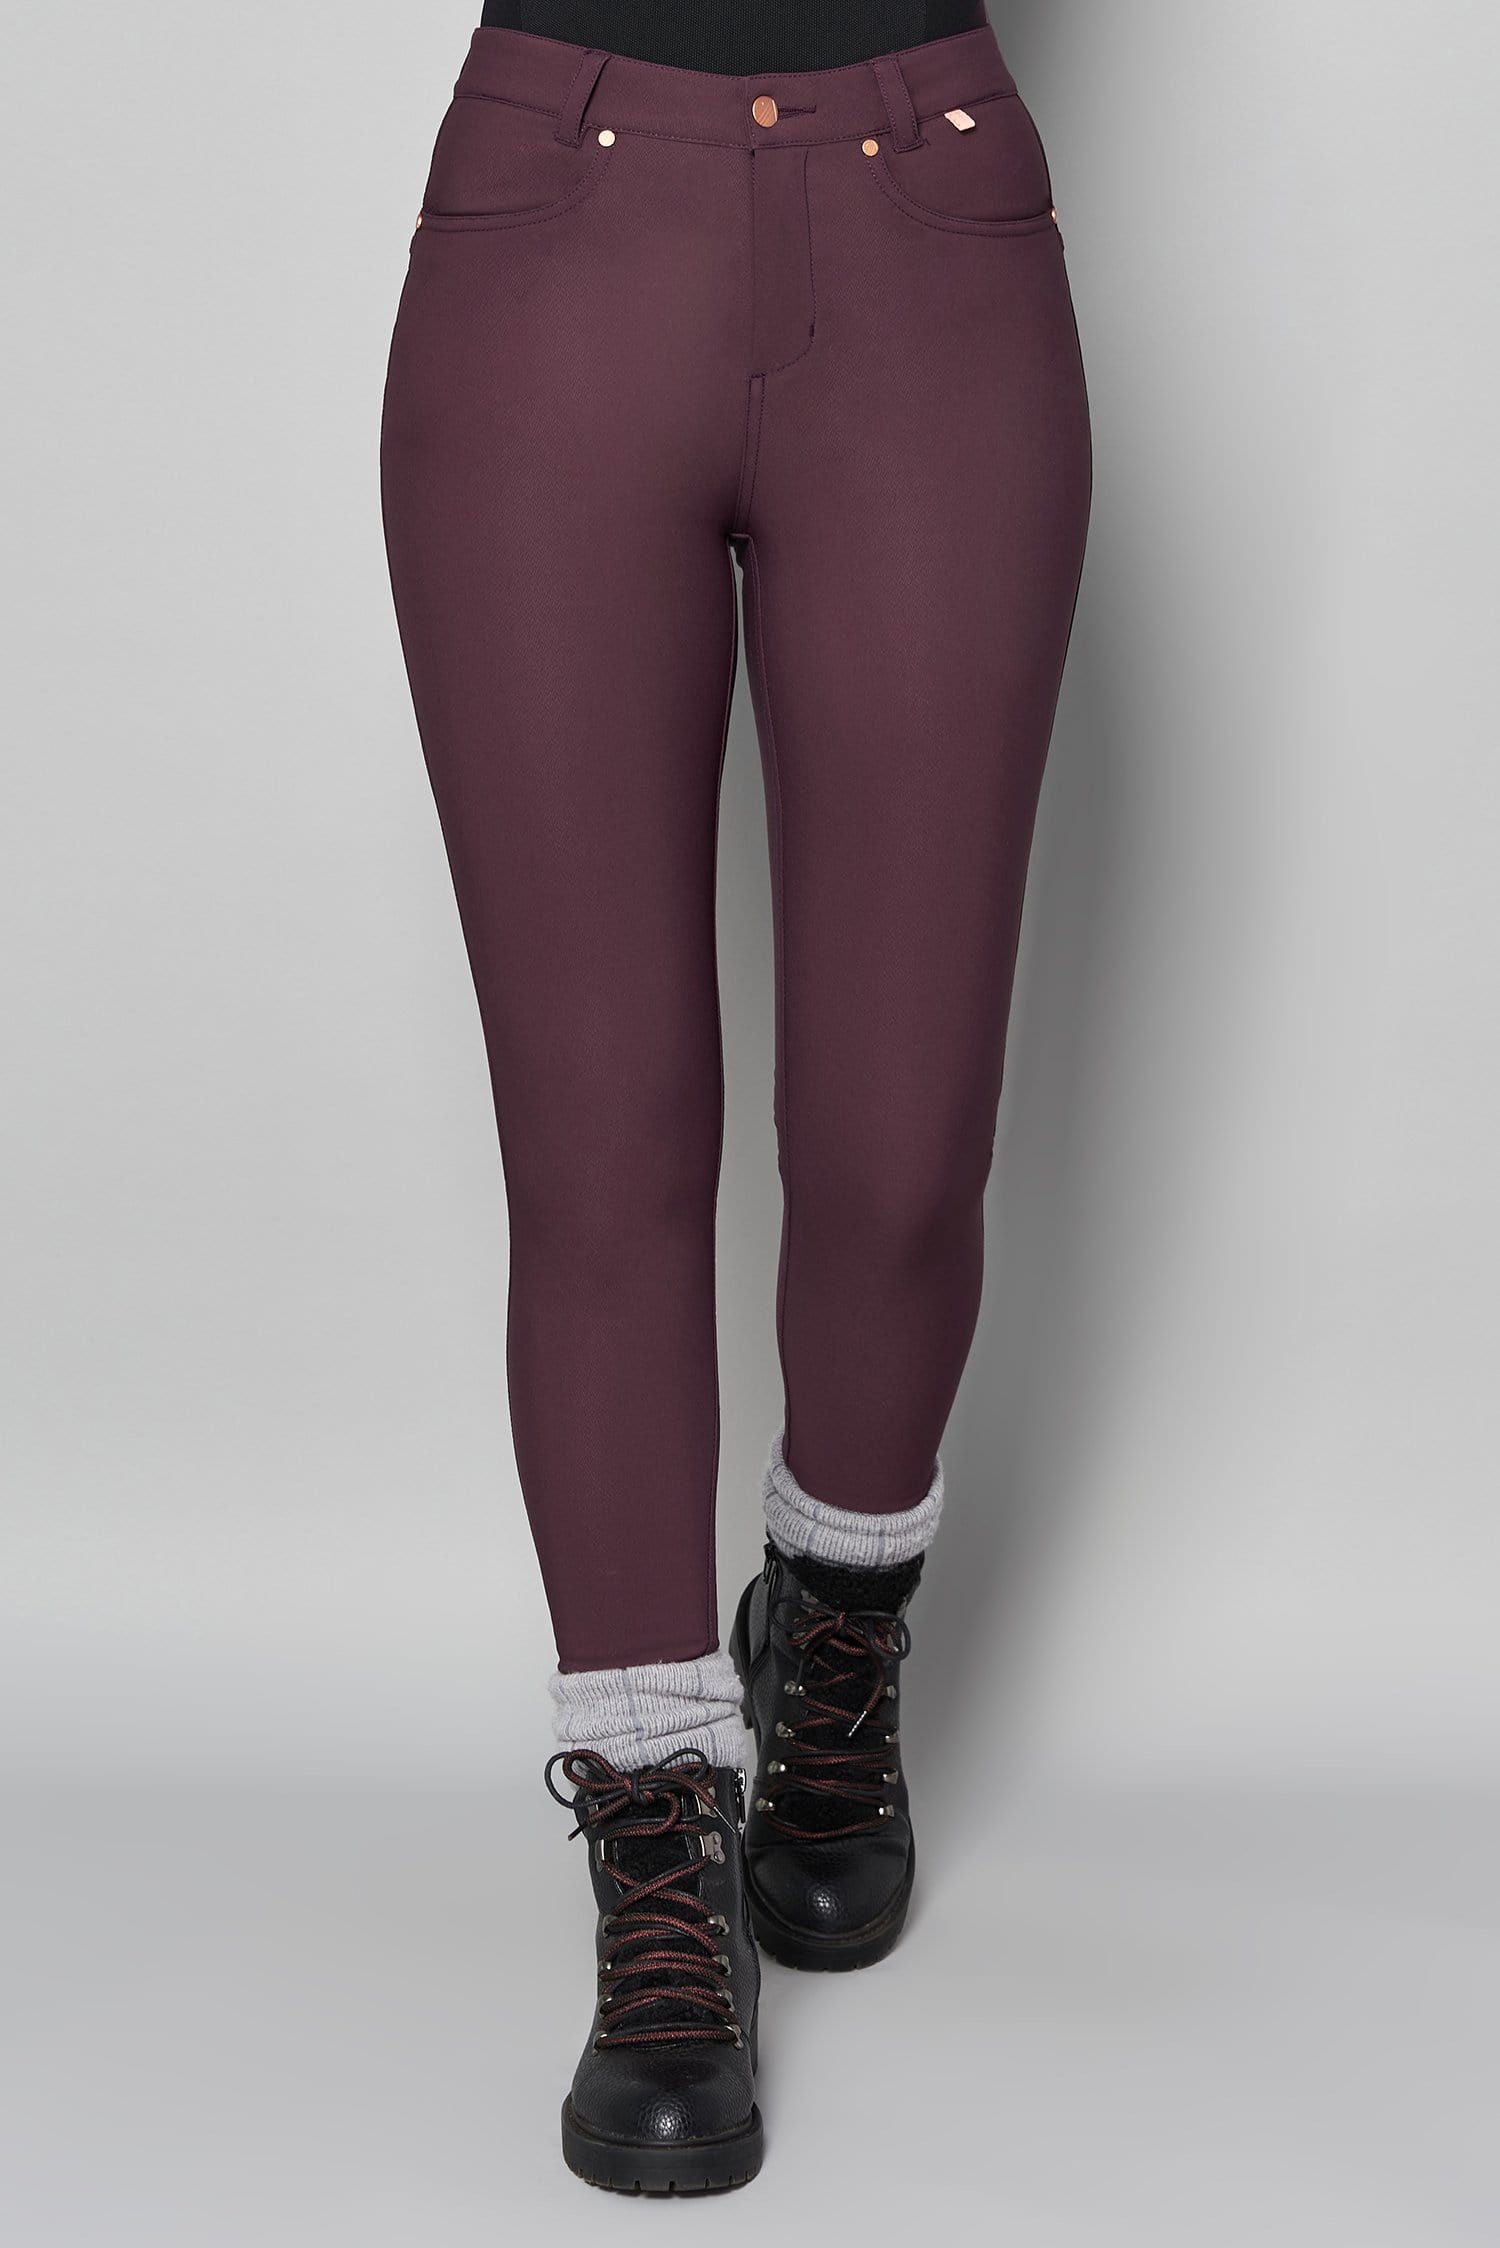 Thermal Skinny Outdoor Trousers - Aubergine - 28l /uk10 - Womens - Acai Outdoorwear